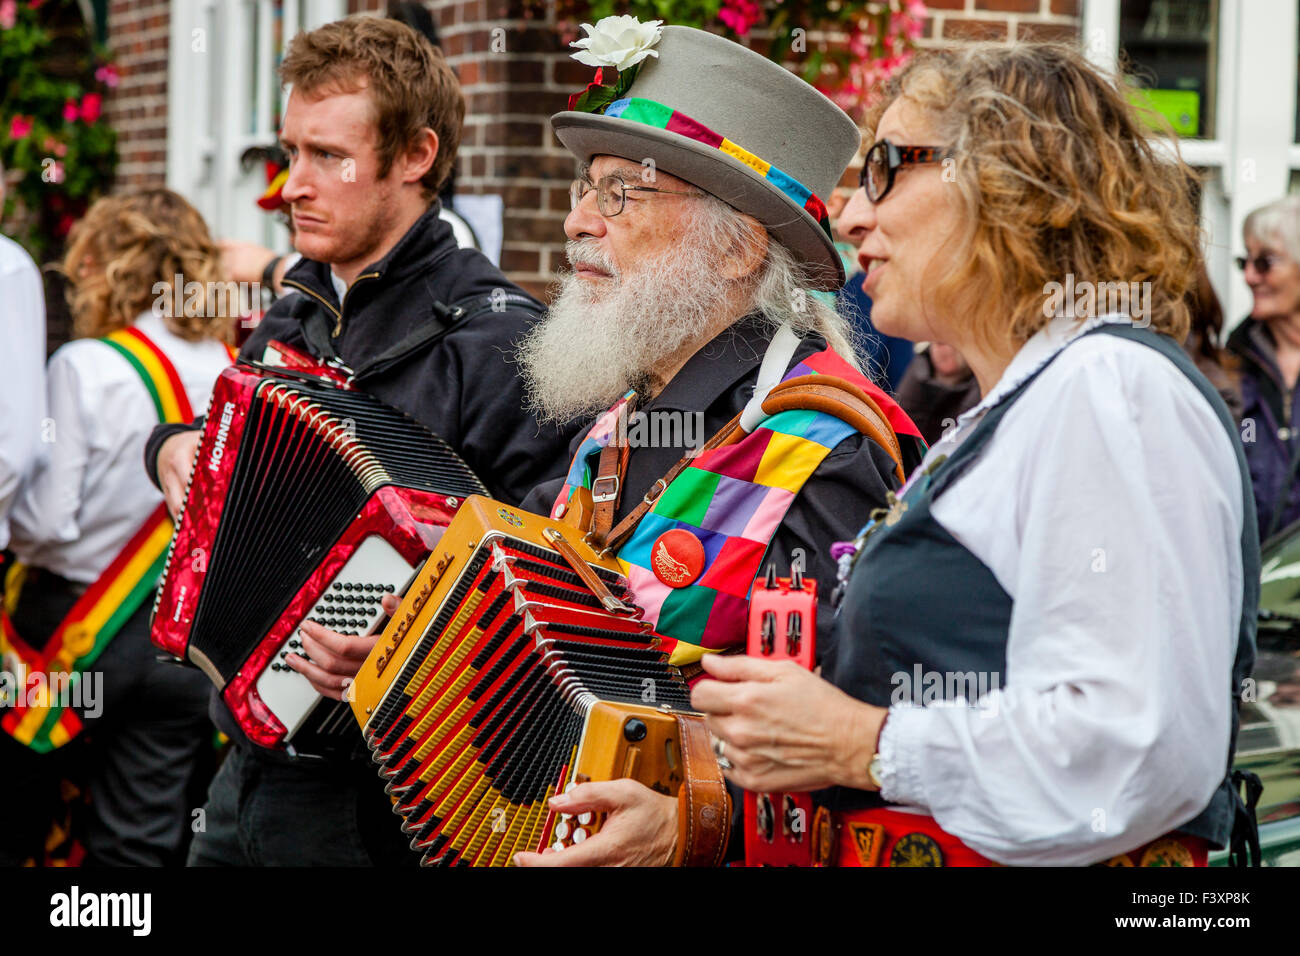 Morris Dancing Groups Performing In The Town of Lewes During The Towns Annual Folk Festival, Lewes, Sussex, UK Stock Photo